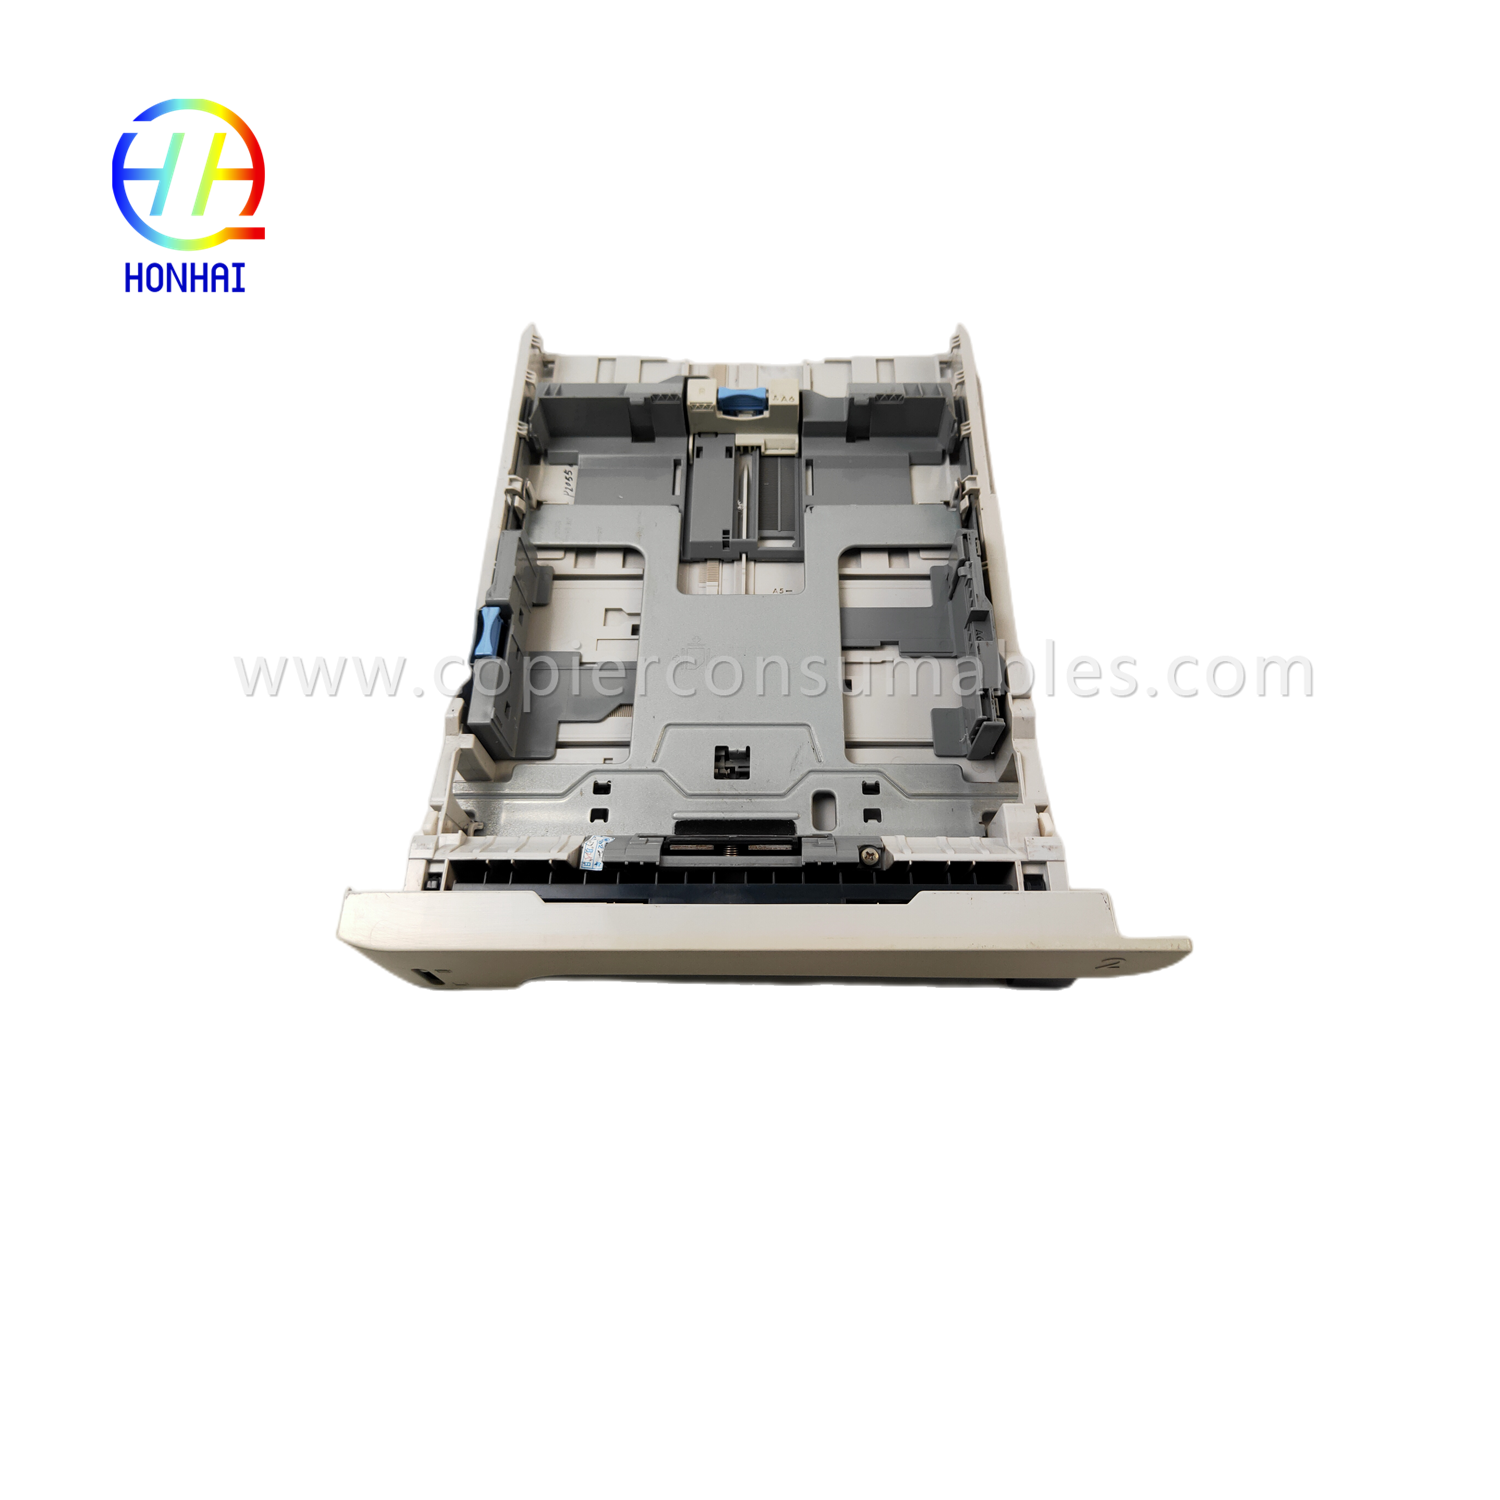 https://c585.goodo.net/paper-tray-assembly-for-xerox-phaser-3320dni-workcentre-3315dn-3325dni-050n00650-cassette-paper-tray-product/